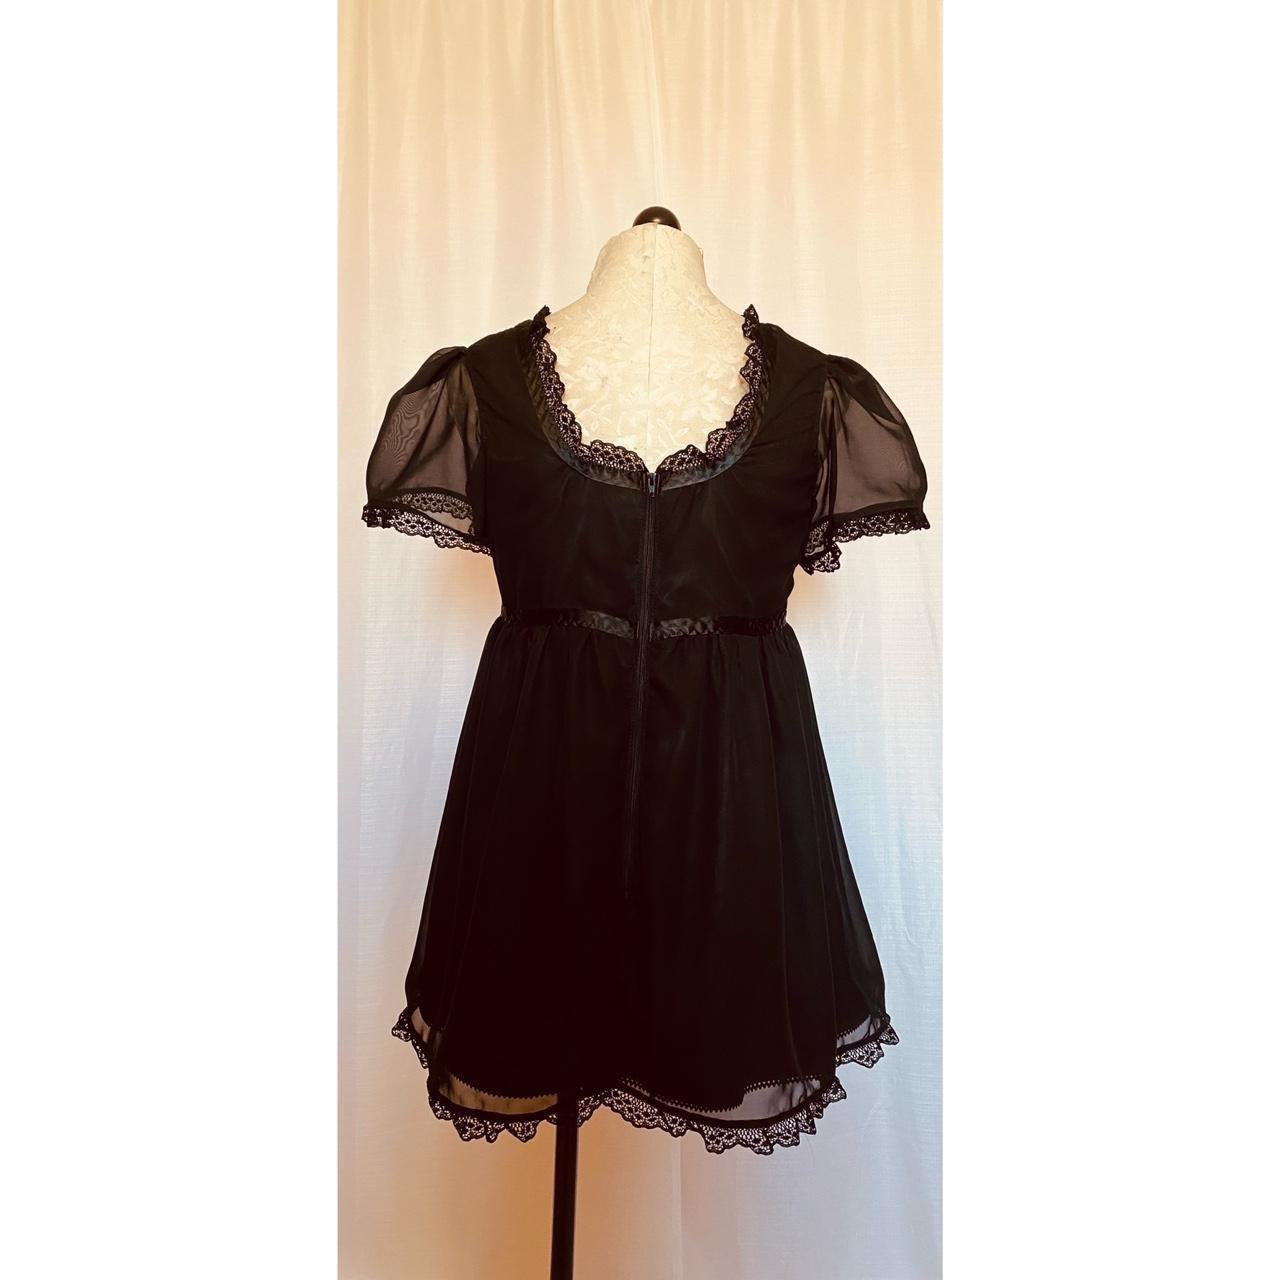 The Isabelle Dress in Black Chiffon